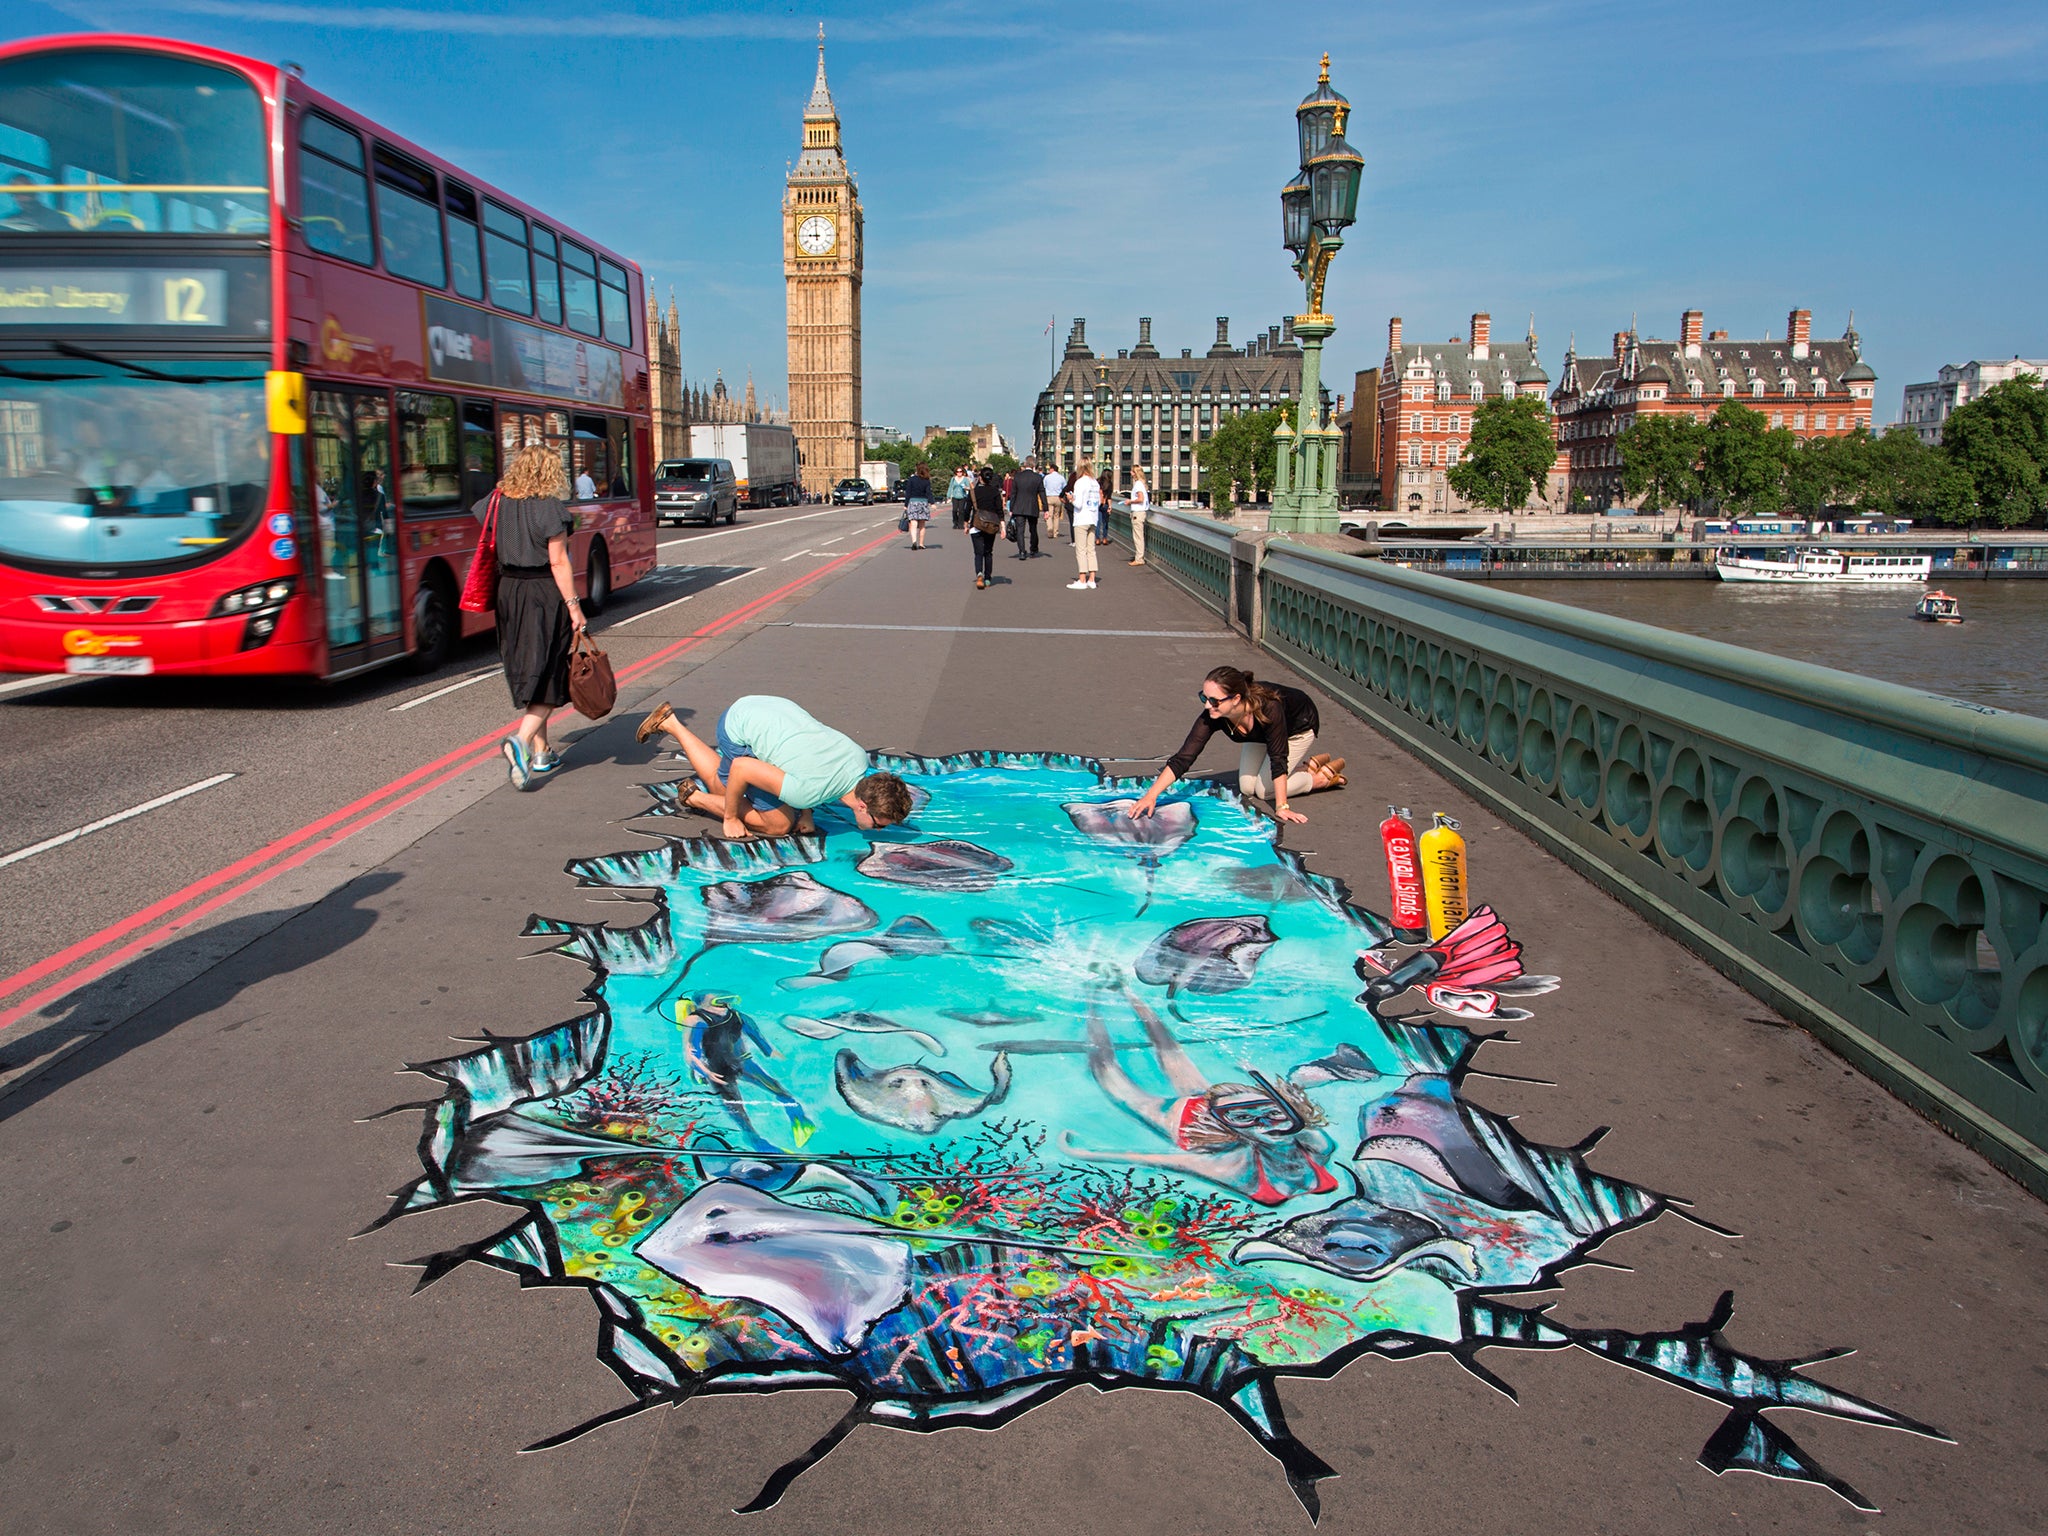 The Cayman Islands' famous Stingray City arrived in London through a piece of 3D street art